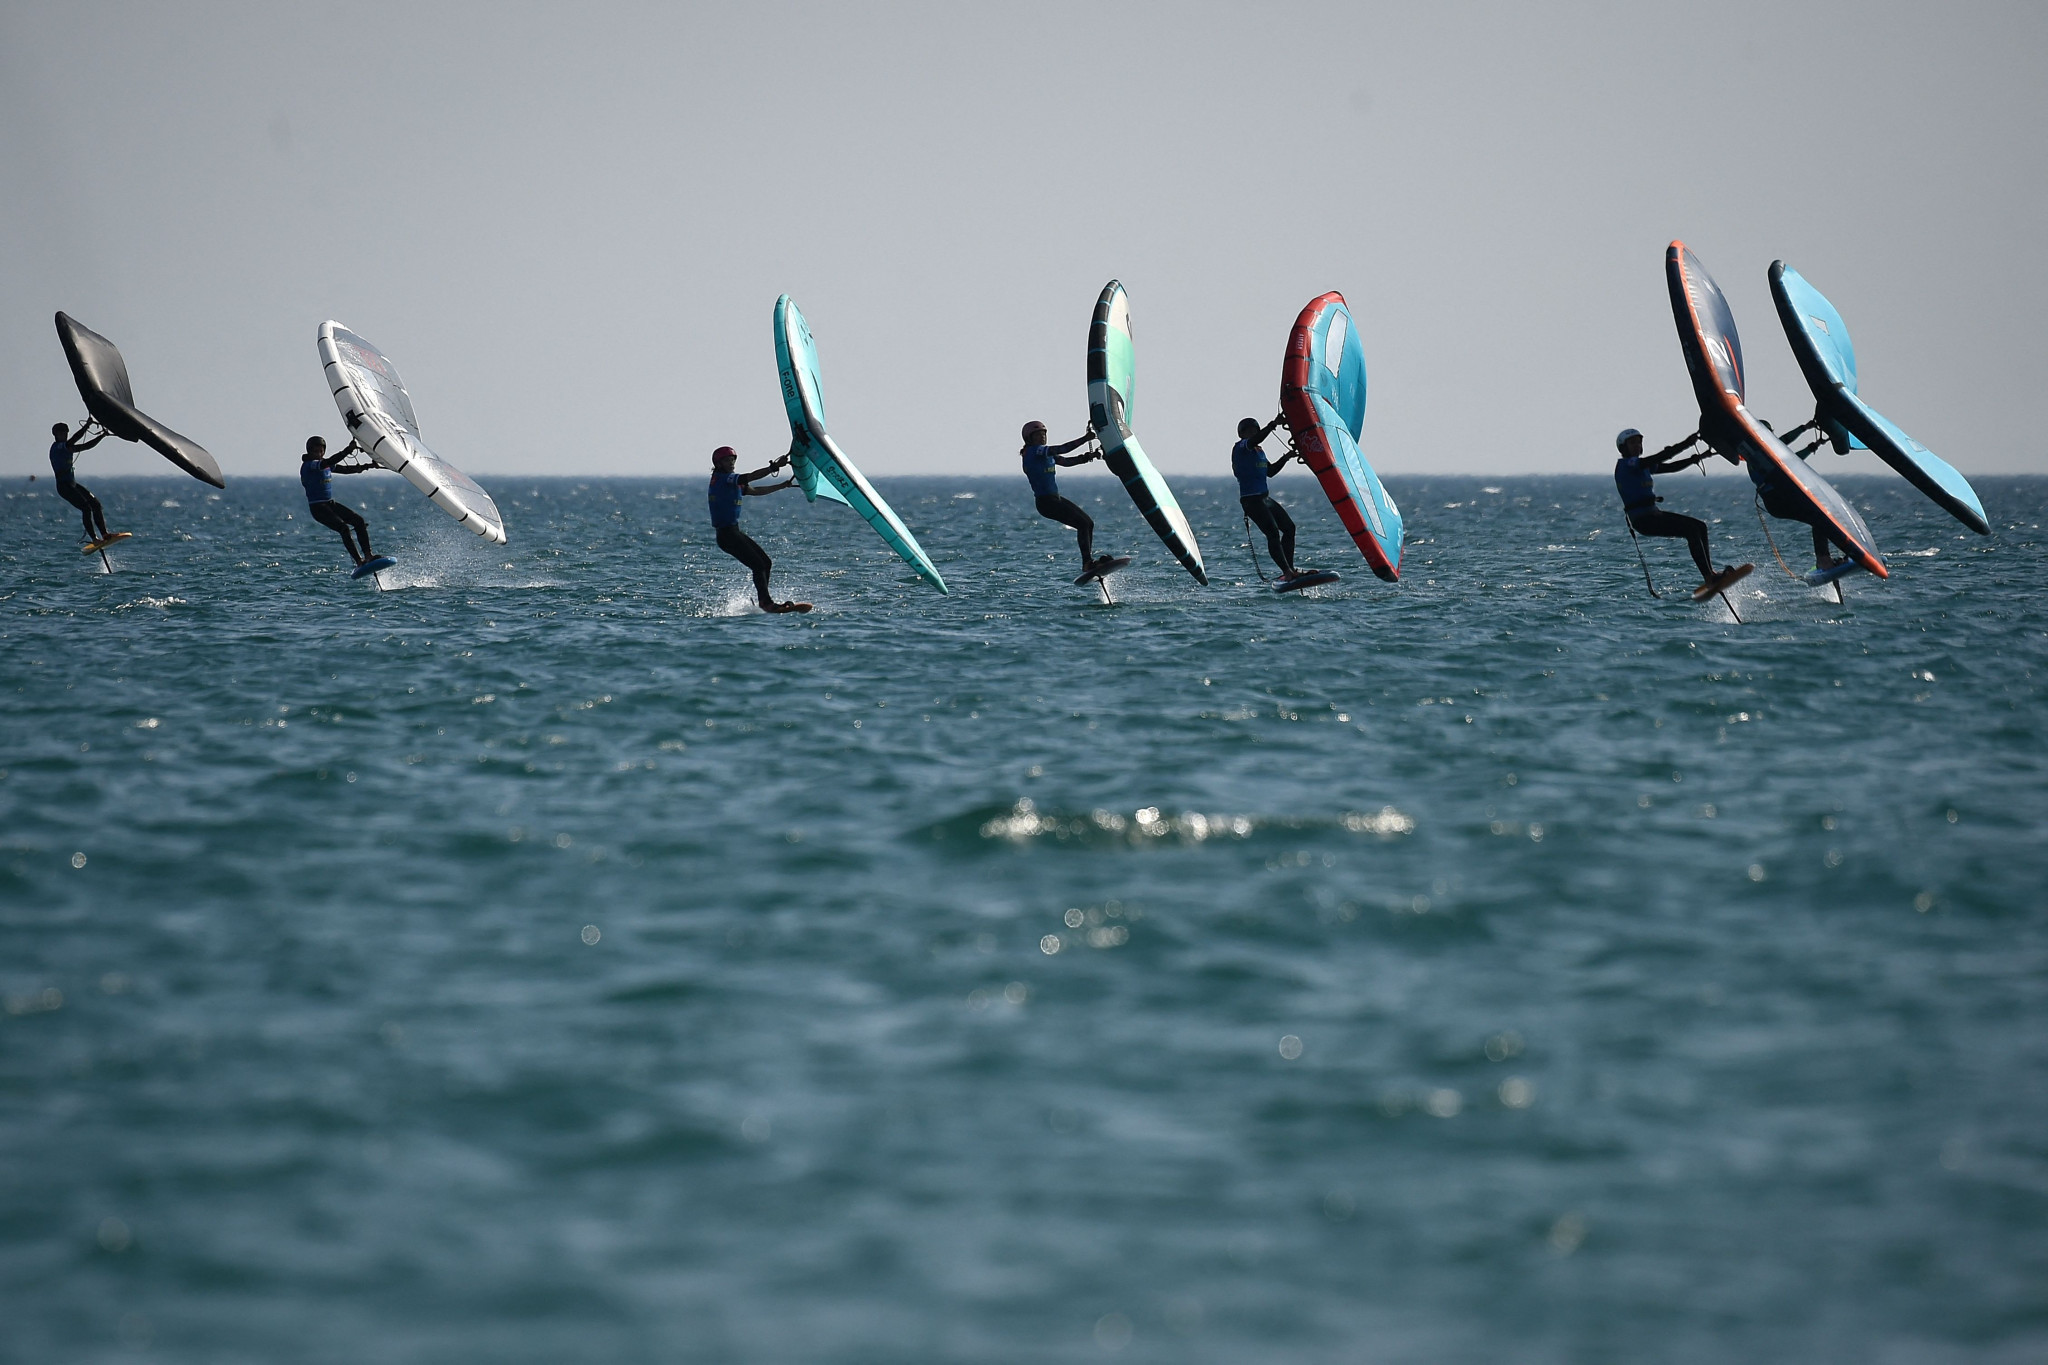 Wingfoil replaces kitefoil at 2023 ANOC World Beach Games